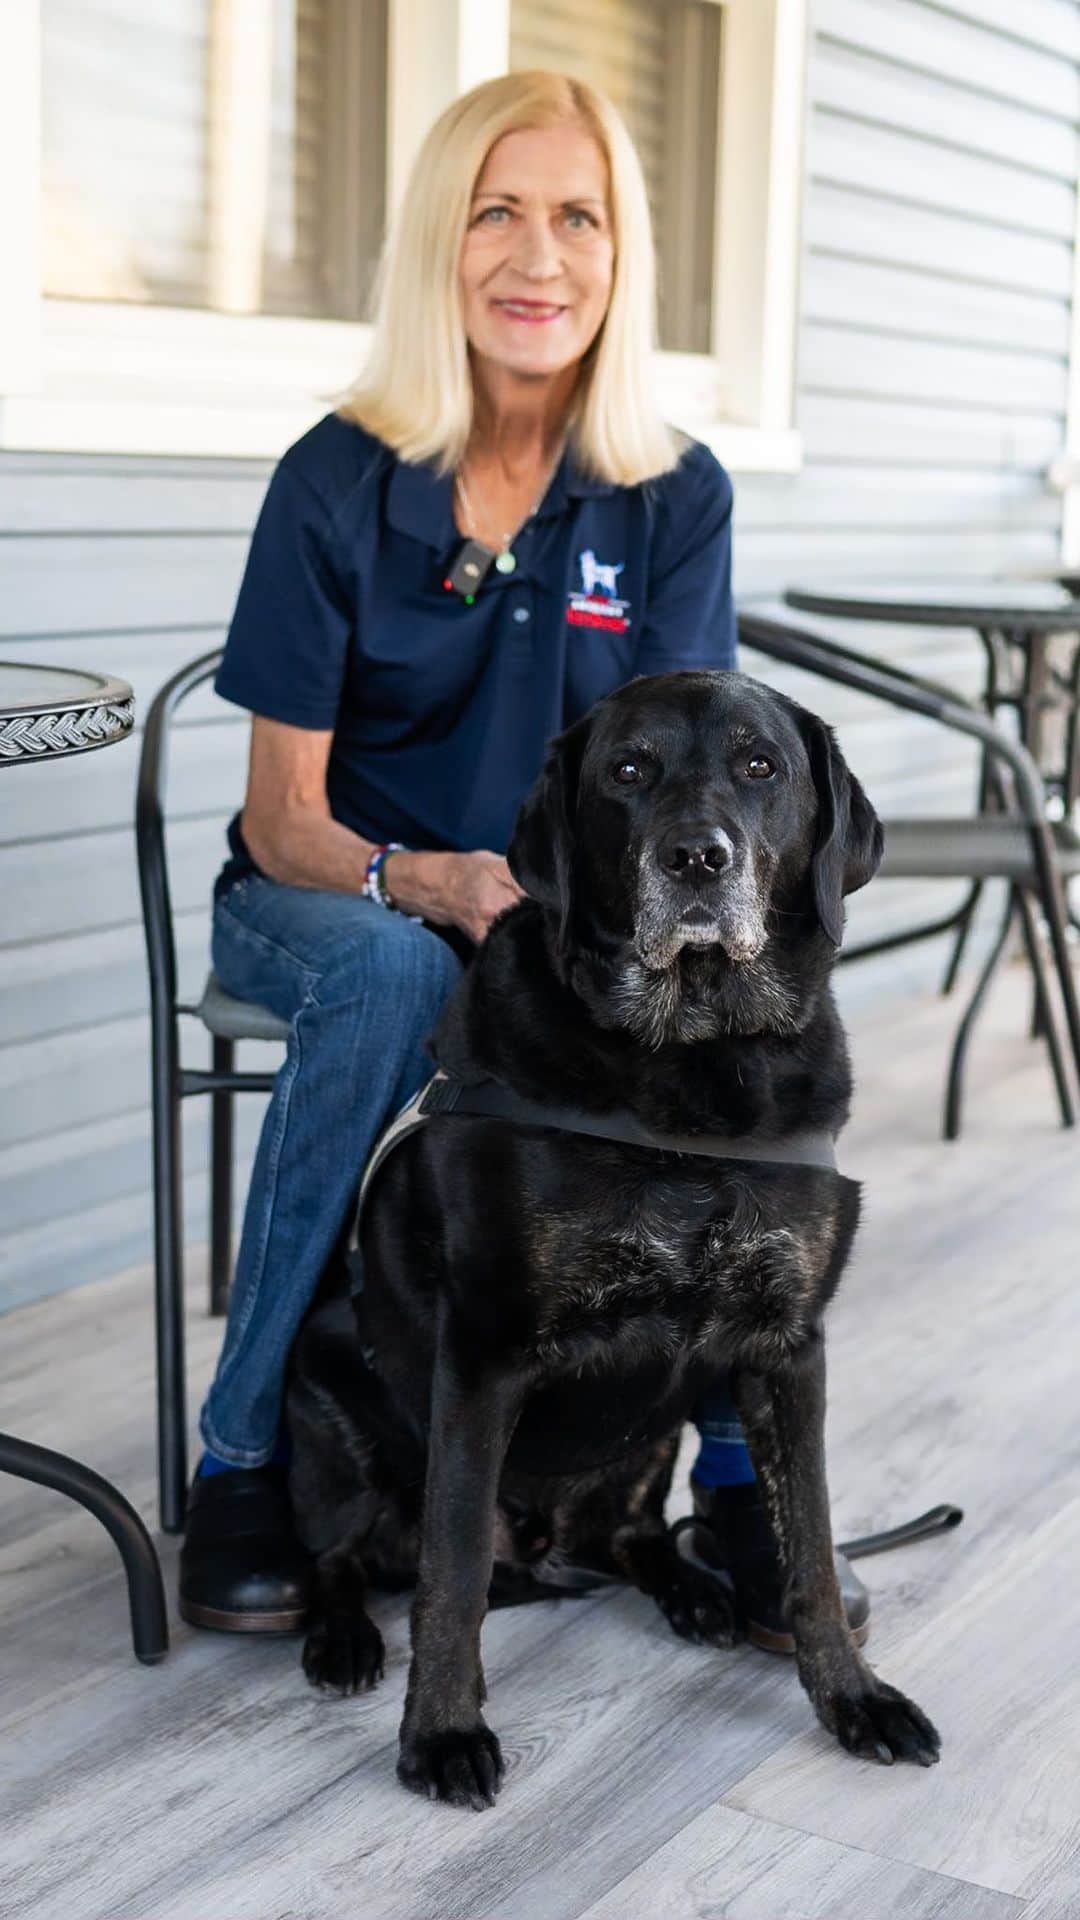 The Dogistのインスタグラム：「Eddie & Sharon Rinier, Labrador Retriever and Retired U.S. Army RN, Keyport, NJ • Thanks to your support, we’ve already raised over $15,000 with @gofundme for @americasvetdogs! Let’s keep the support coming! Next in our series, I visited Sharon and her service dog, Edward (but he goes by Eddie), to learn about her role as a nurse in the army for 10 years, the difficulties she faced when reintegrating back to civilian life after her deployment in Iraq, and how Eddie has stayed by her side through it all.   America’s VetDogs’ mission is to help those who have served our country honorably live with dignity and independence. They raise, train, and place assistance dogs for veterans with physical disabilities; guide dogs for individuals who are blind or have low vision; service dogs to help mitigate the effects of post-traumatic stress disorder; and facility dogs as part of the rehabilitation process in military and VA hospitals. These dogs immeasurably change the lives of the veterans who are lucky enough to receive them, often supplanting the need for many pharmaceuticals.   Each dog costs about $50,000 from start to finish, and they provide these dogs at no cost to the veterans. Veterans consistently turn to GoFundMe for help affording and caring for service dogs - a cause that is not currently supported by the VA.   If you’re able to, please help support their mission with a donation as a Thank You For Your Service. Link in bio. #SponsoredByGoFundMe #paidpartnership」